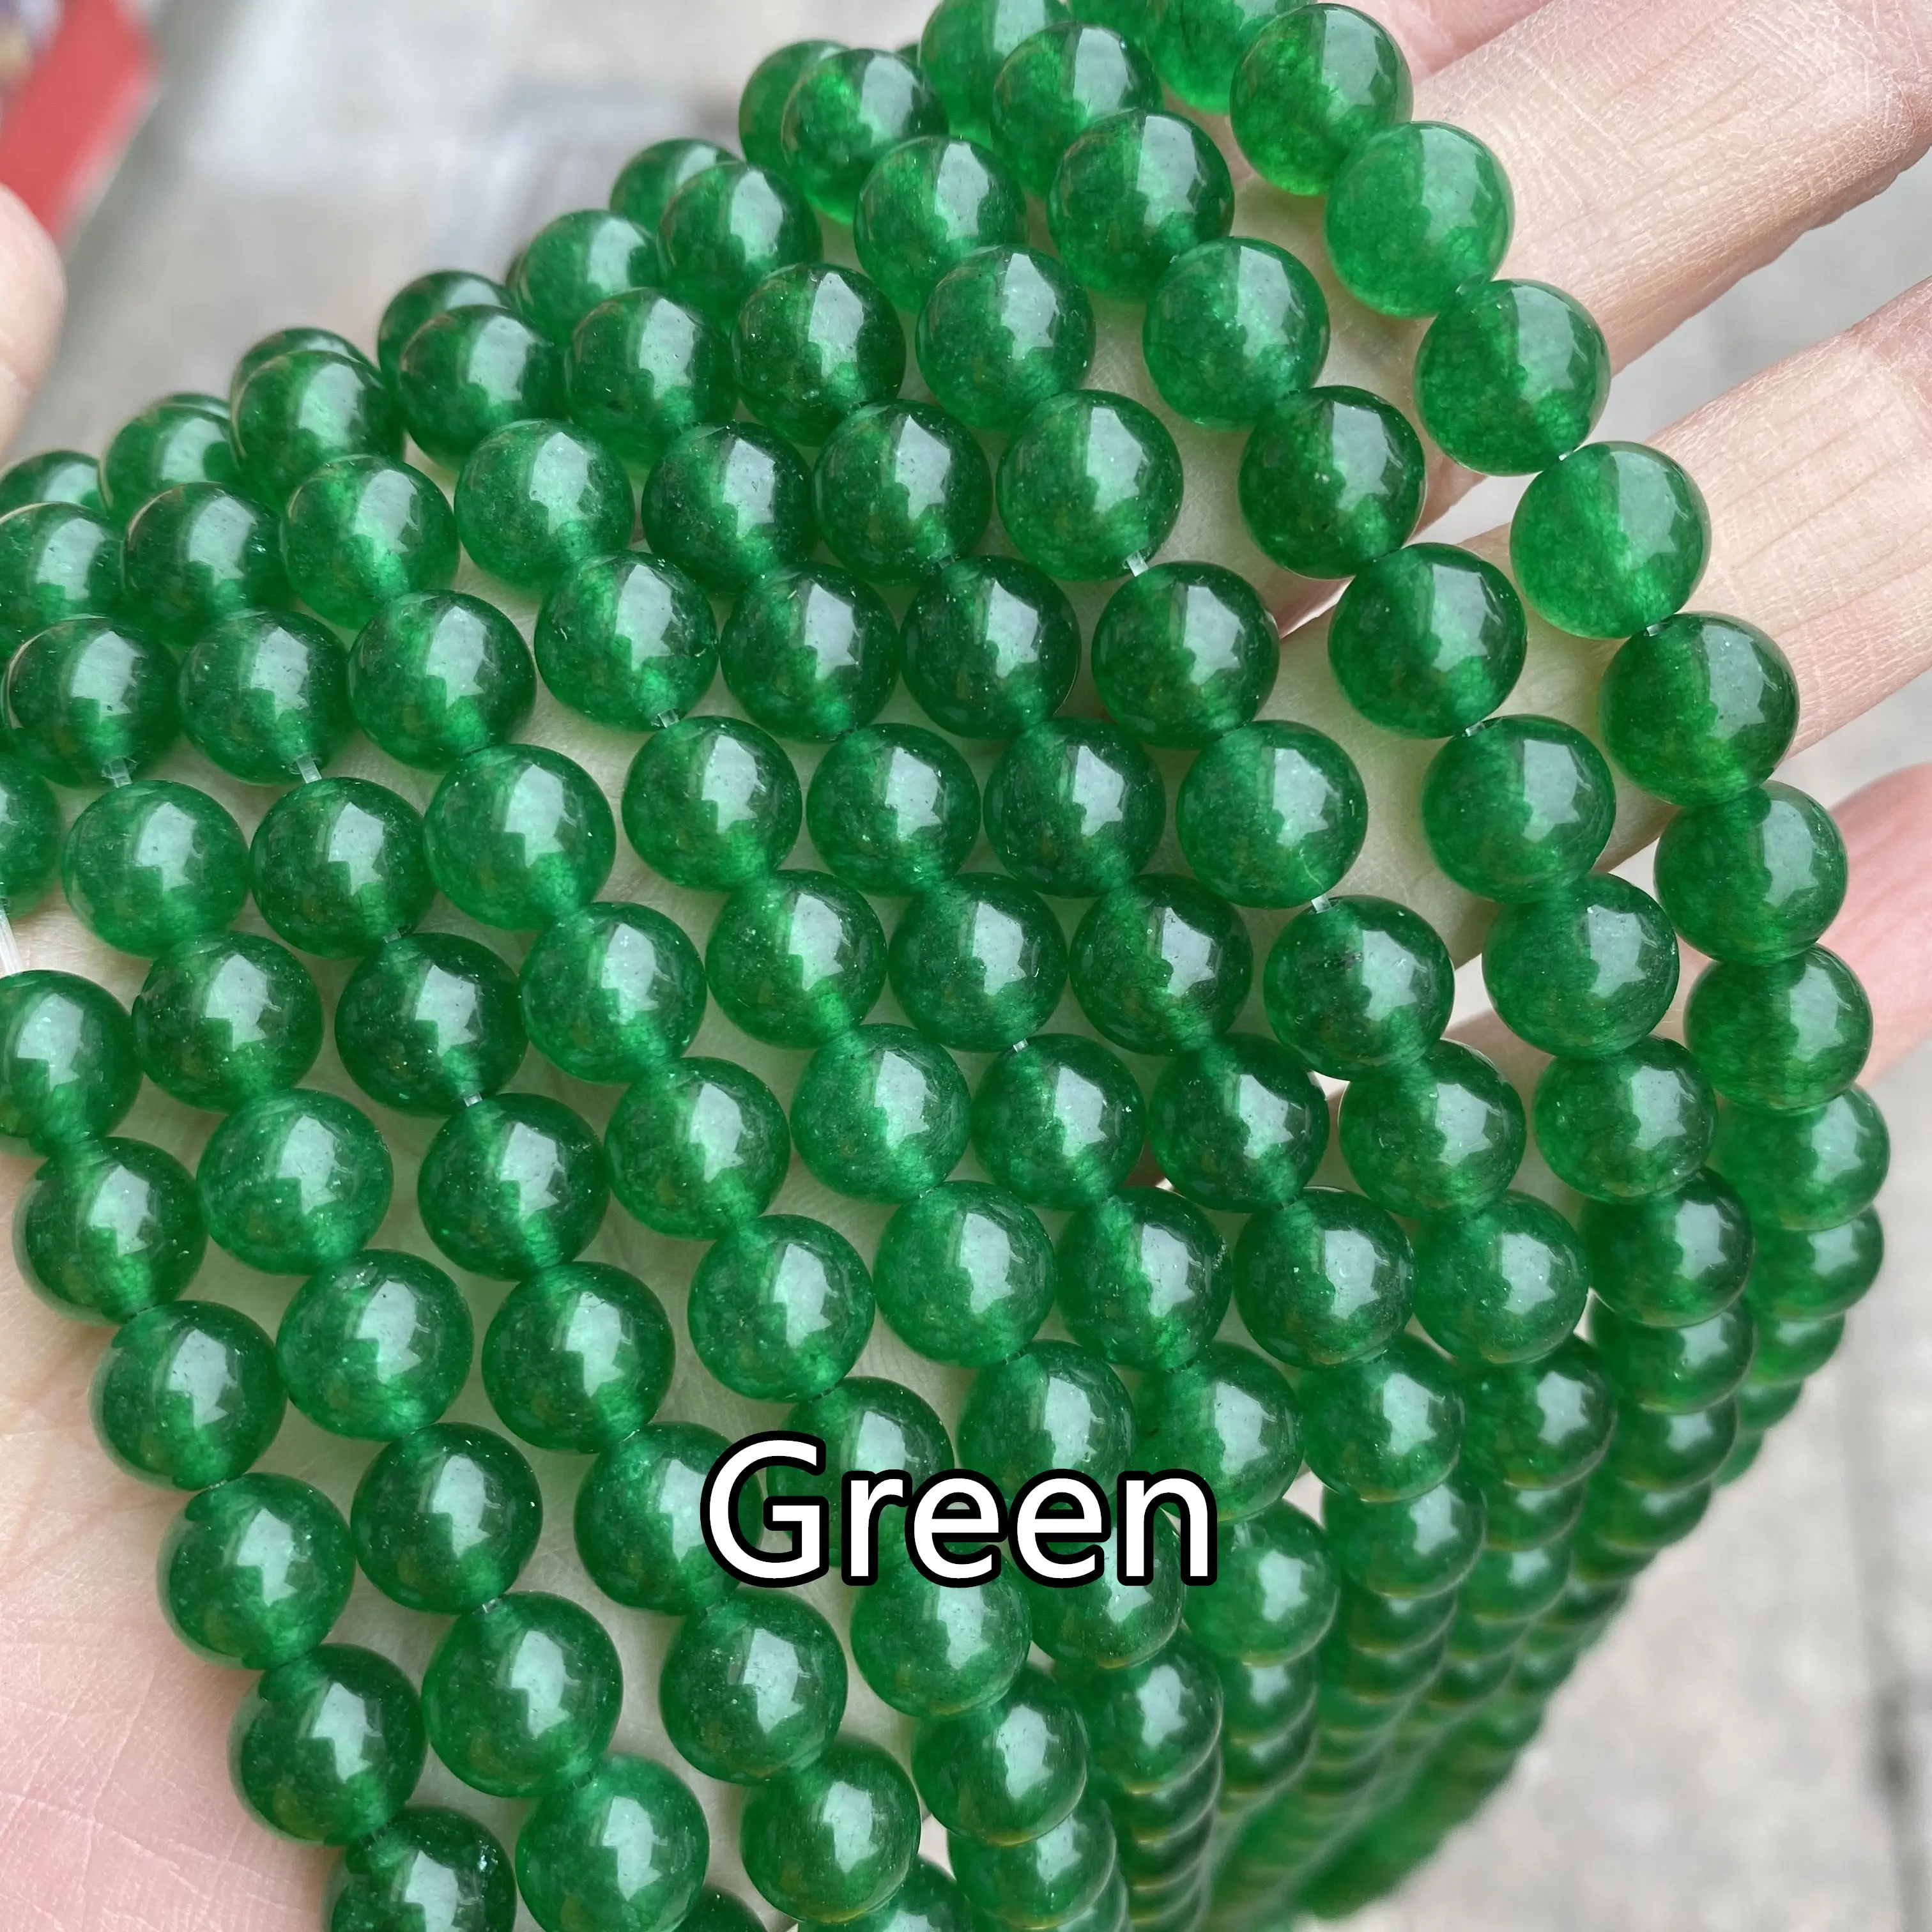 13x18mm Oval Mutil-Color Smooth Jade Stone Loose Beads Jewelry Making 15"DIY 